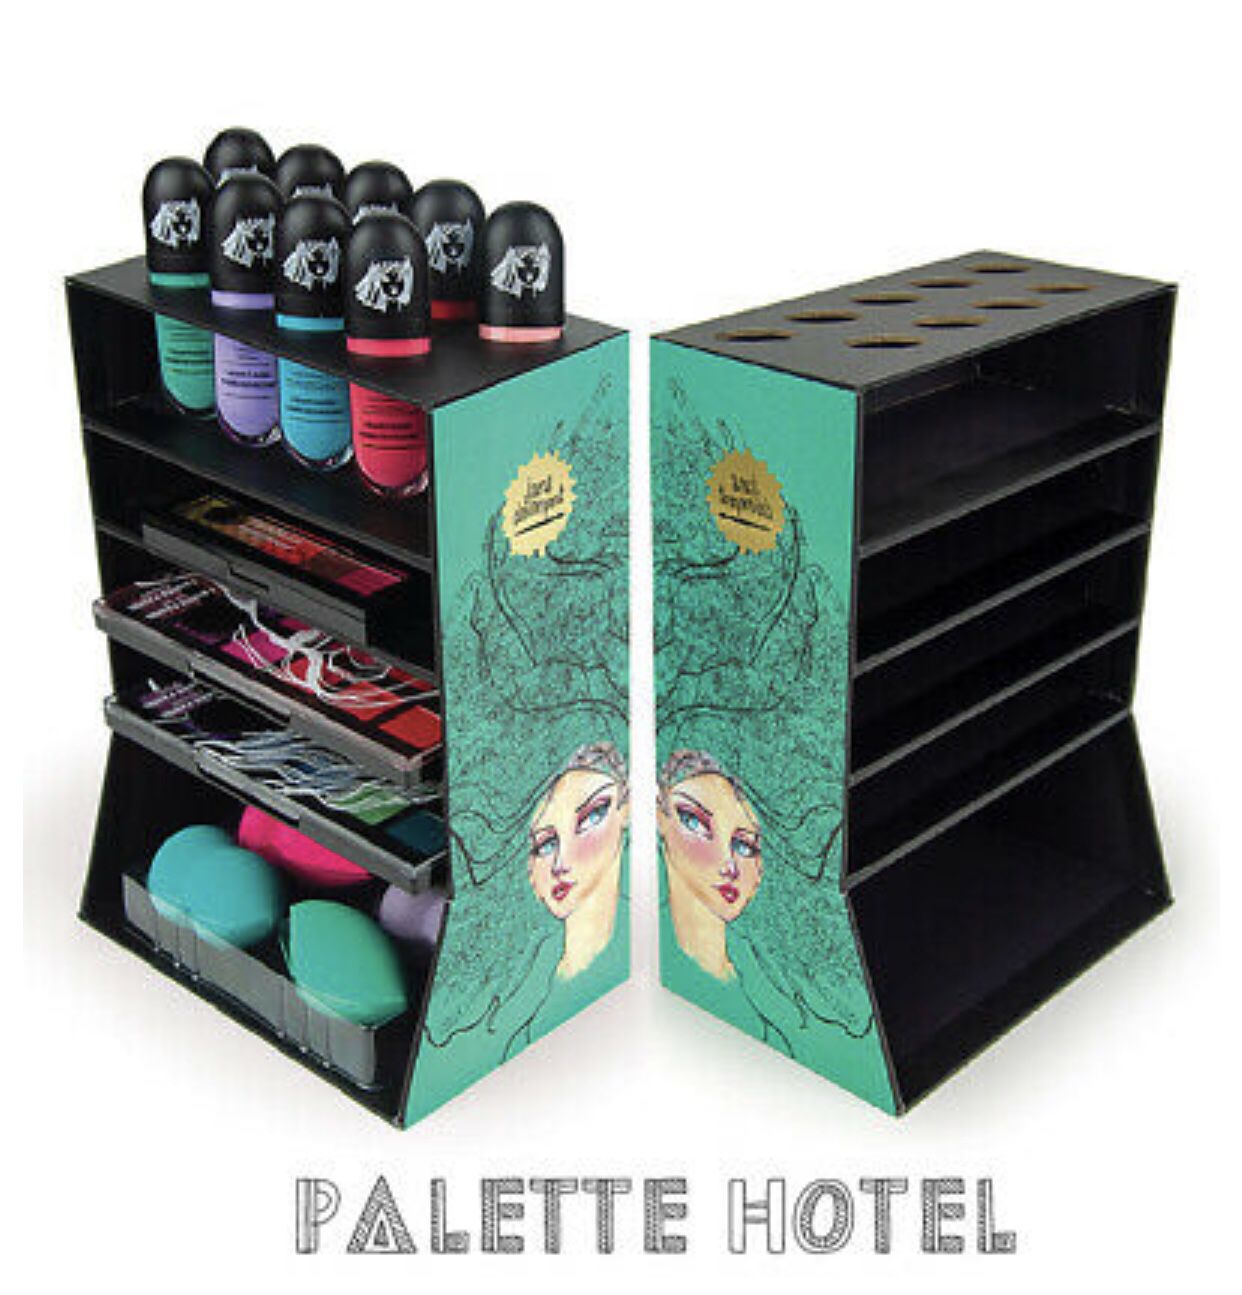 Palette hotel with penthouse